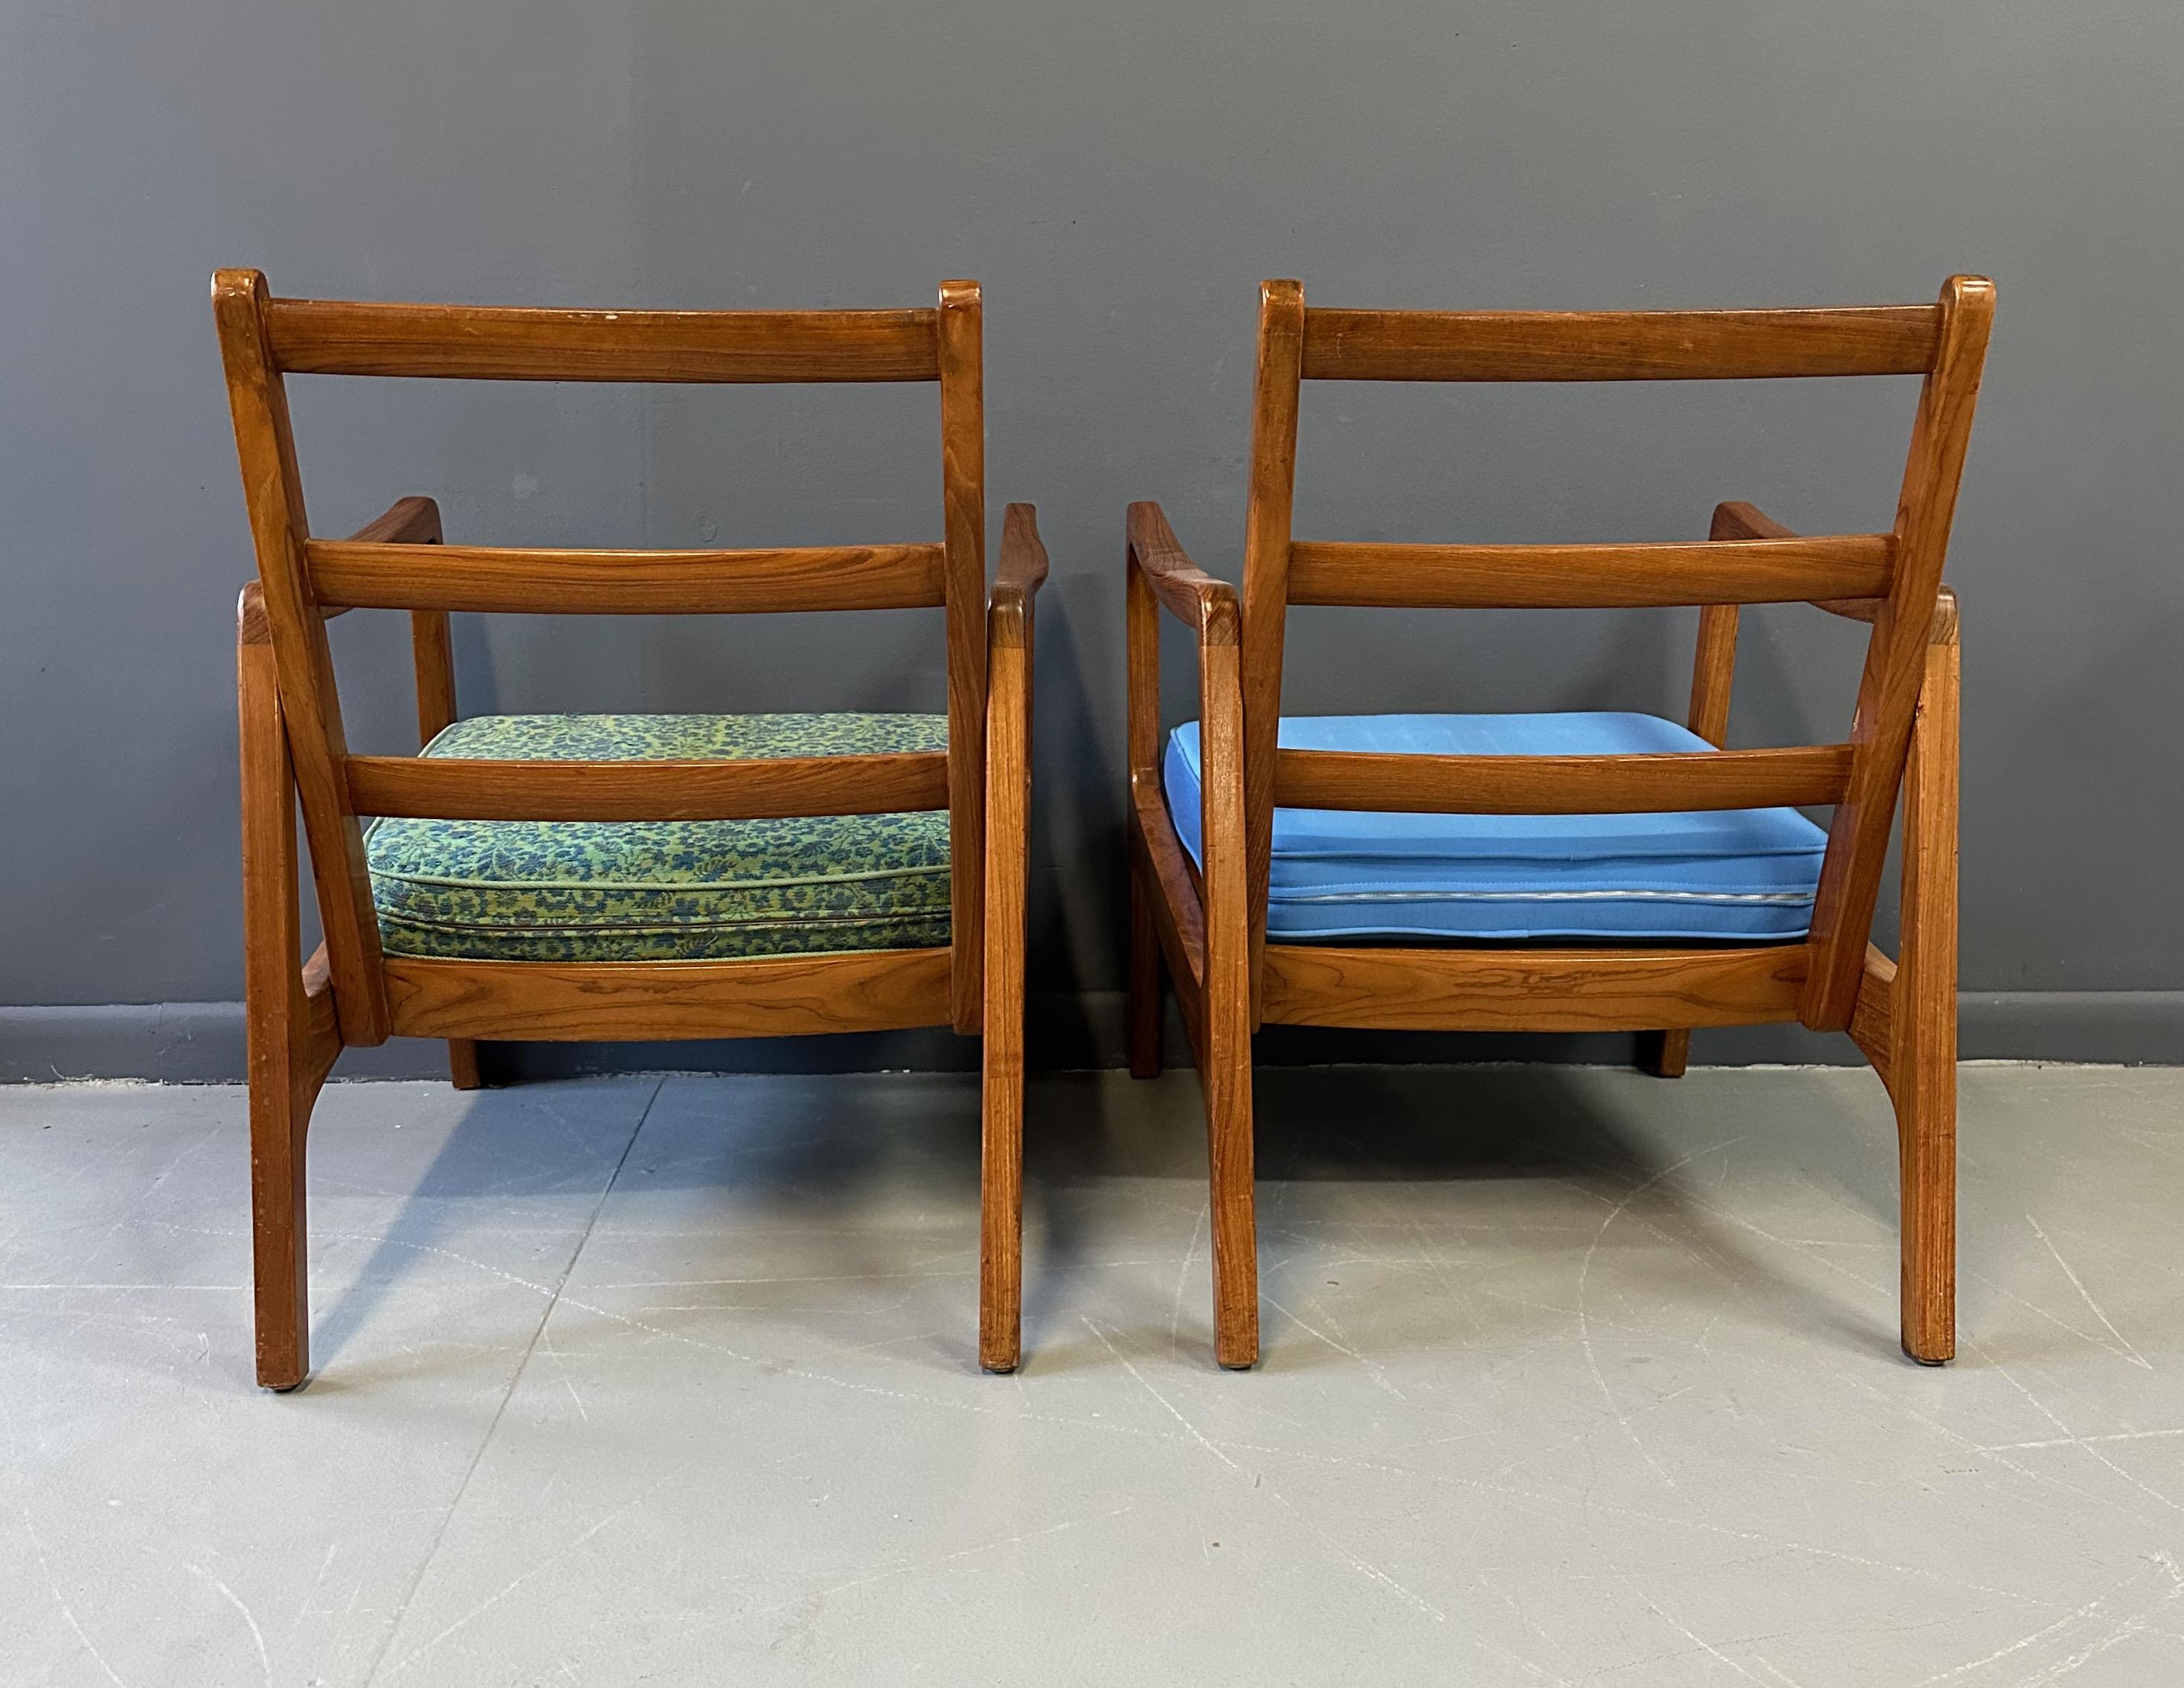 Pair of Danish Teak Easy Chair by Ole Wanscher, 1950s with Ottoman Midcentury In Good Condition For Sale In Philadelphia, PA